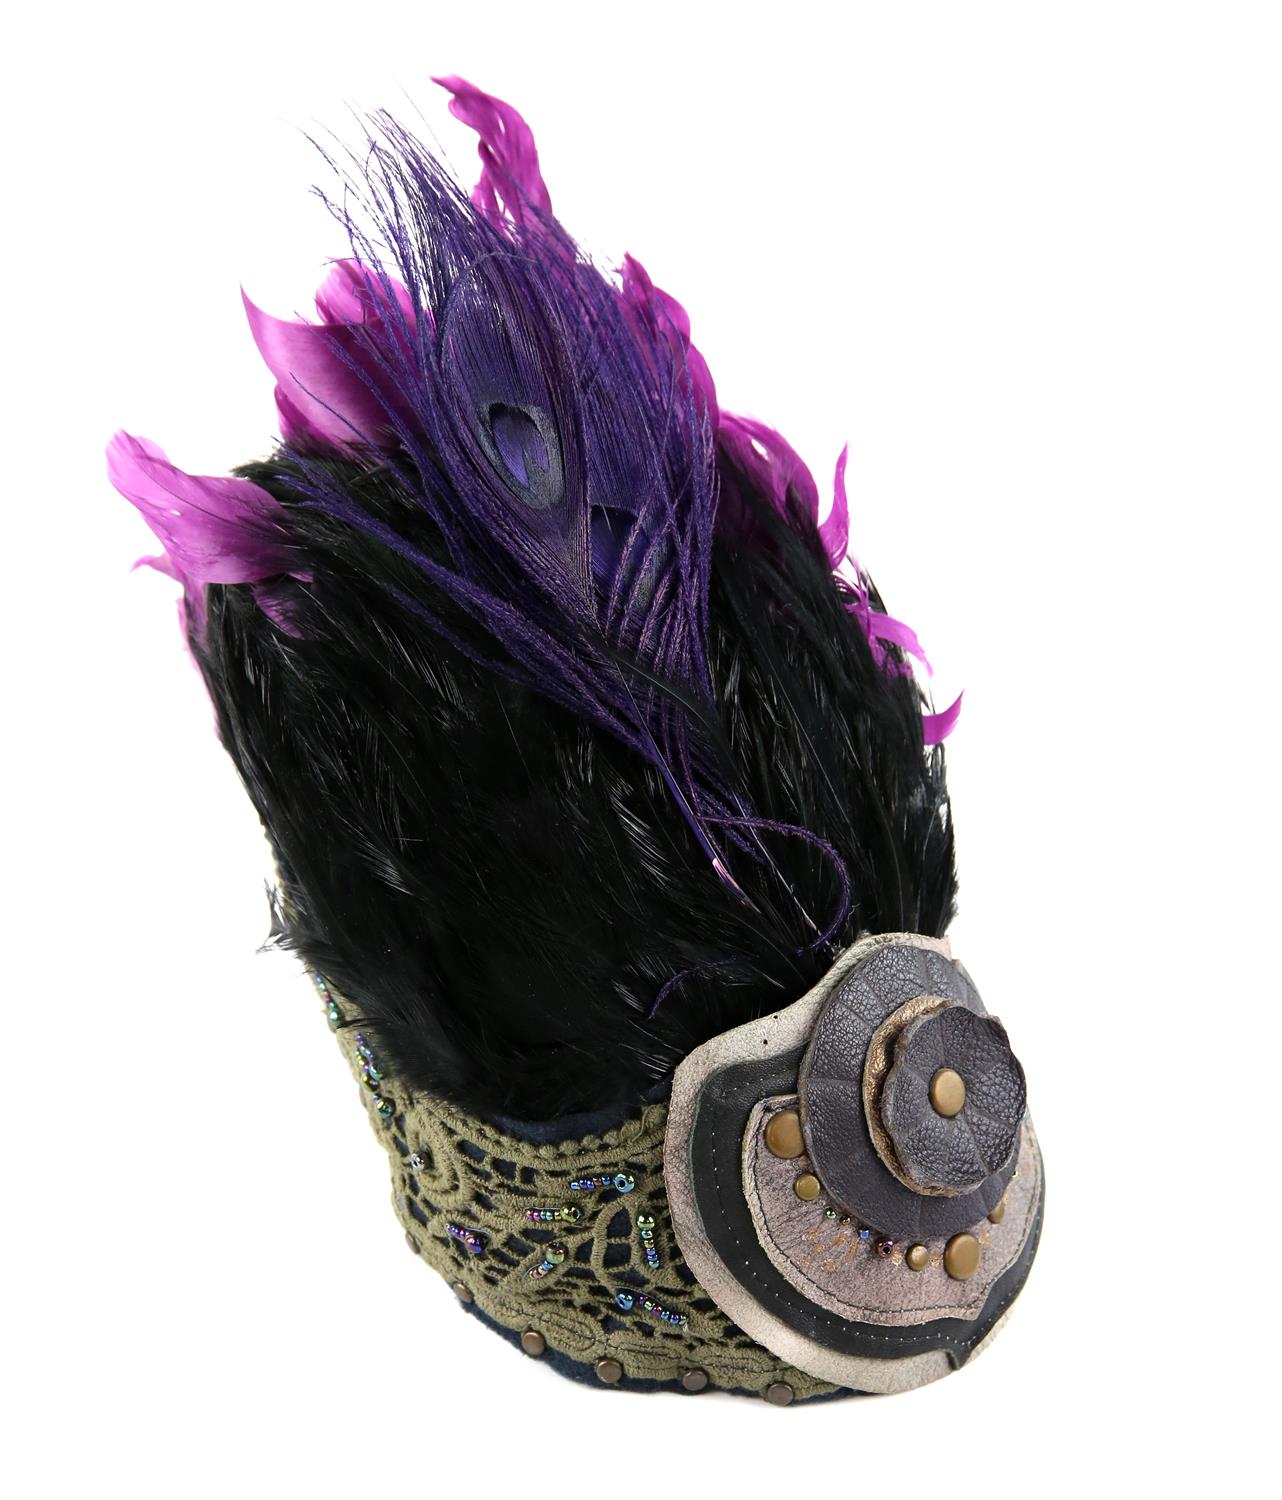 Lady Gaga - a purple feather headdress from the Monster Ball tour, 2009 - 2011, Bedford Falls